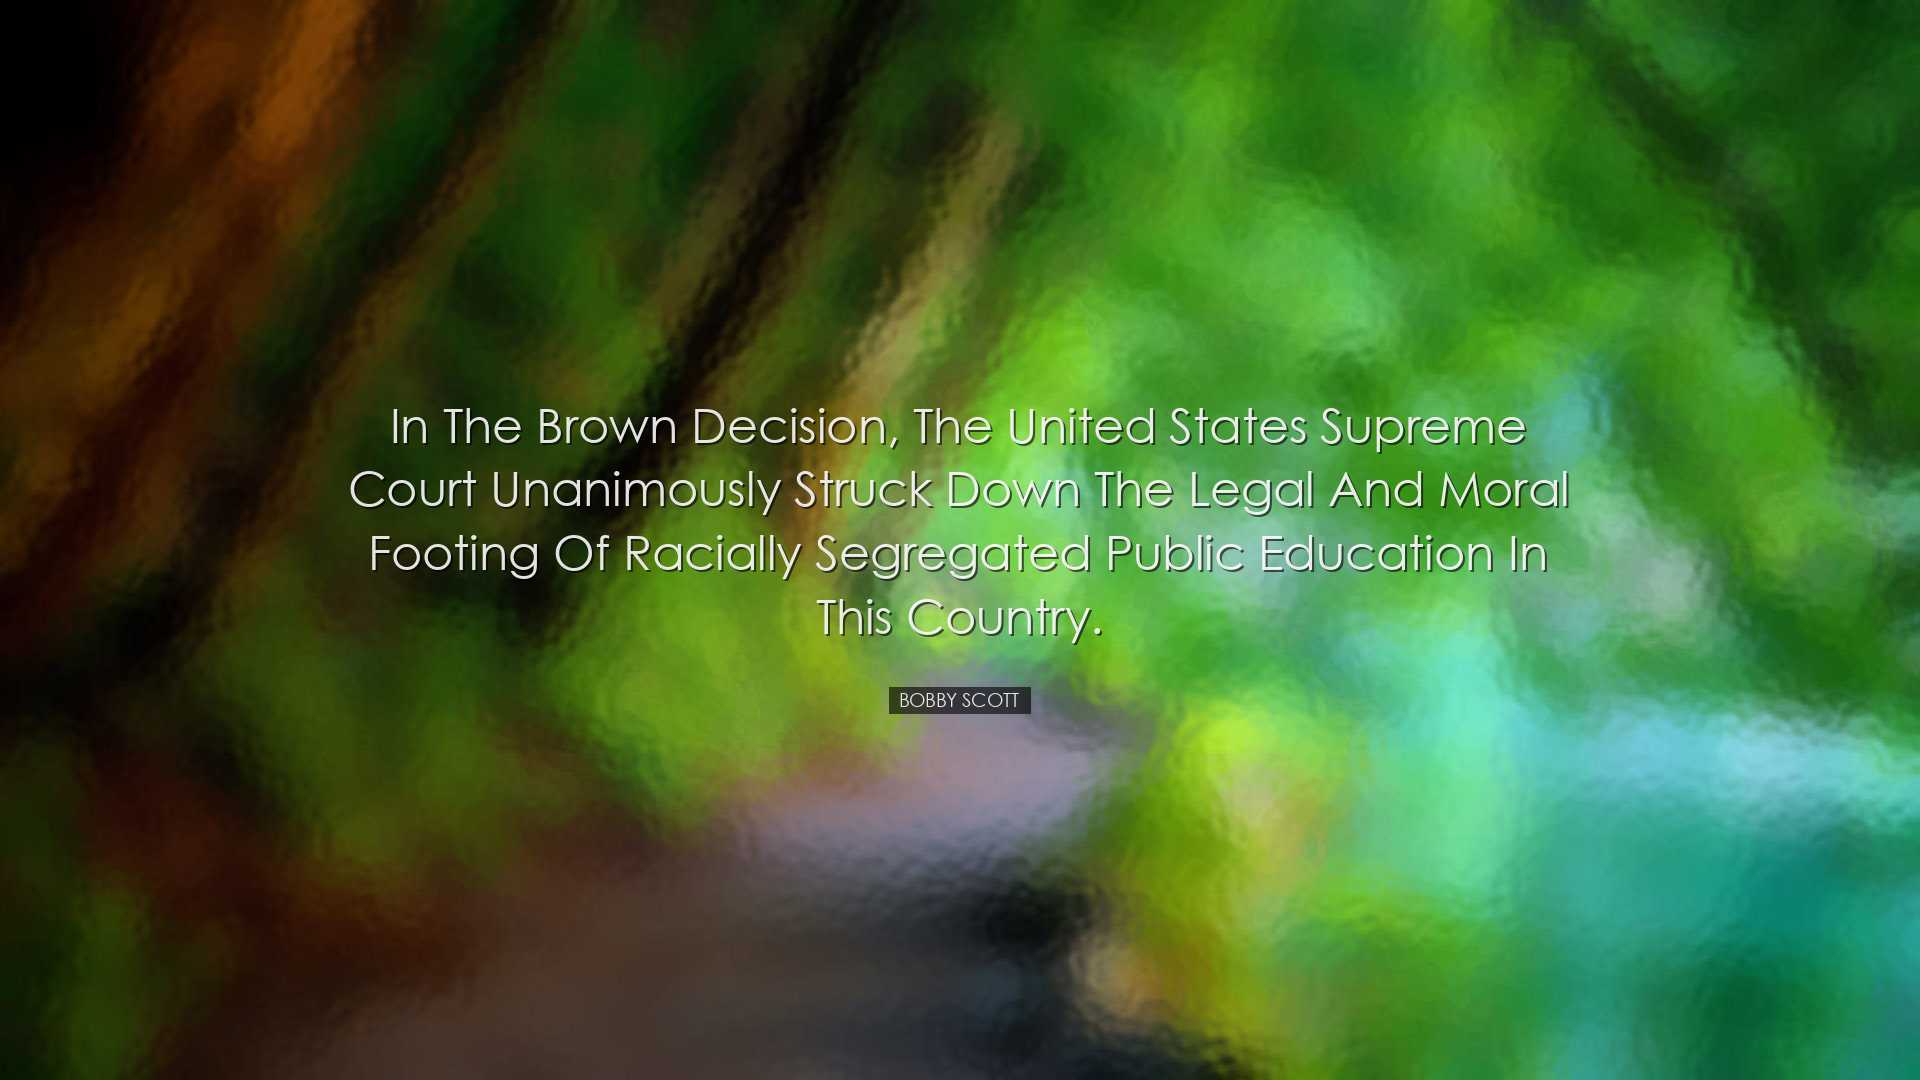 In the Brown decision, the United States Supreme Court unanimously